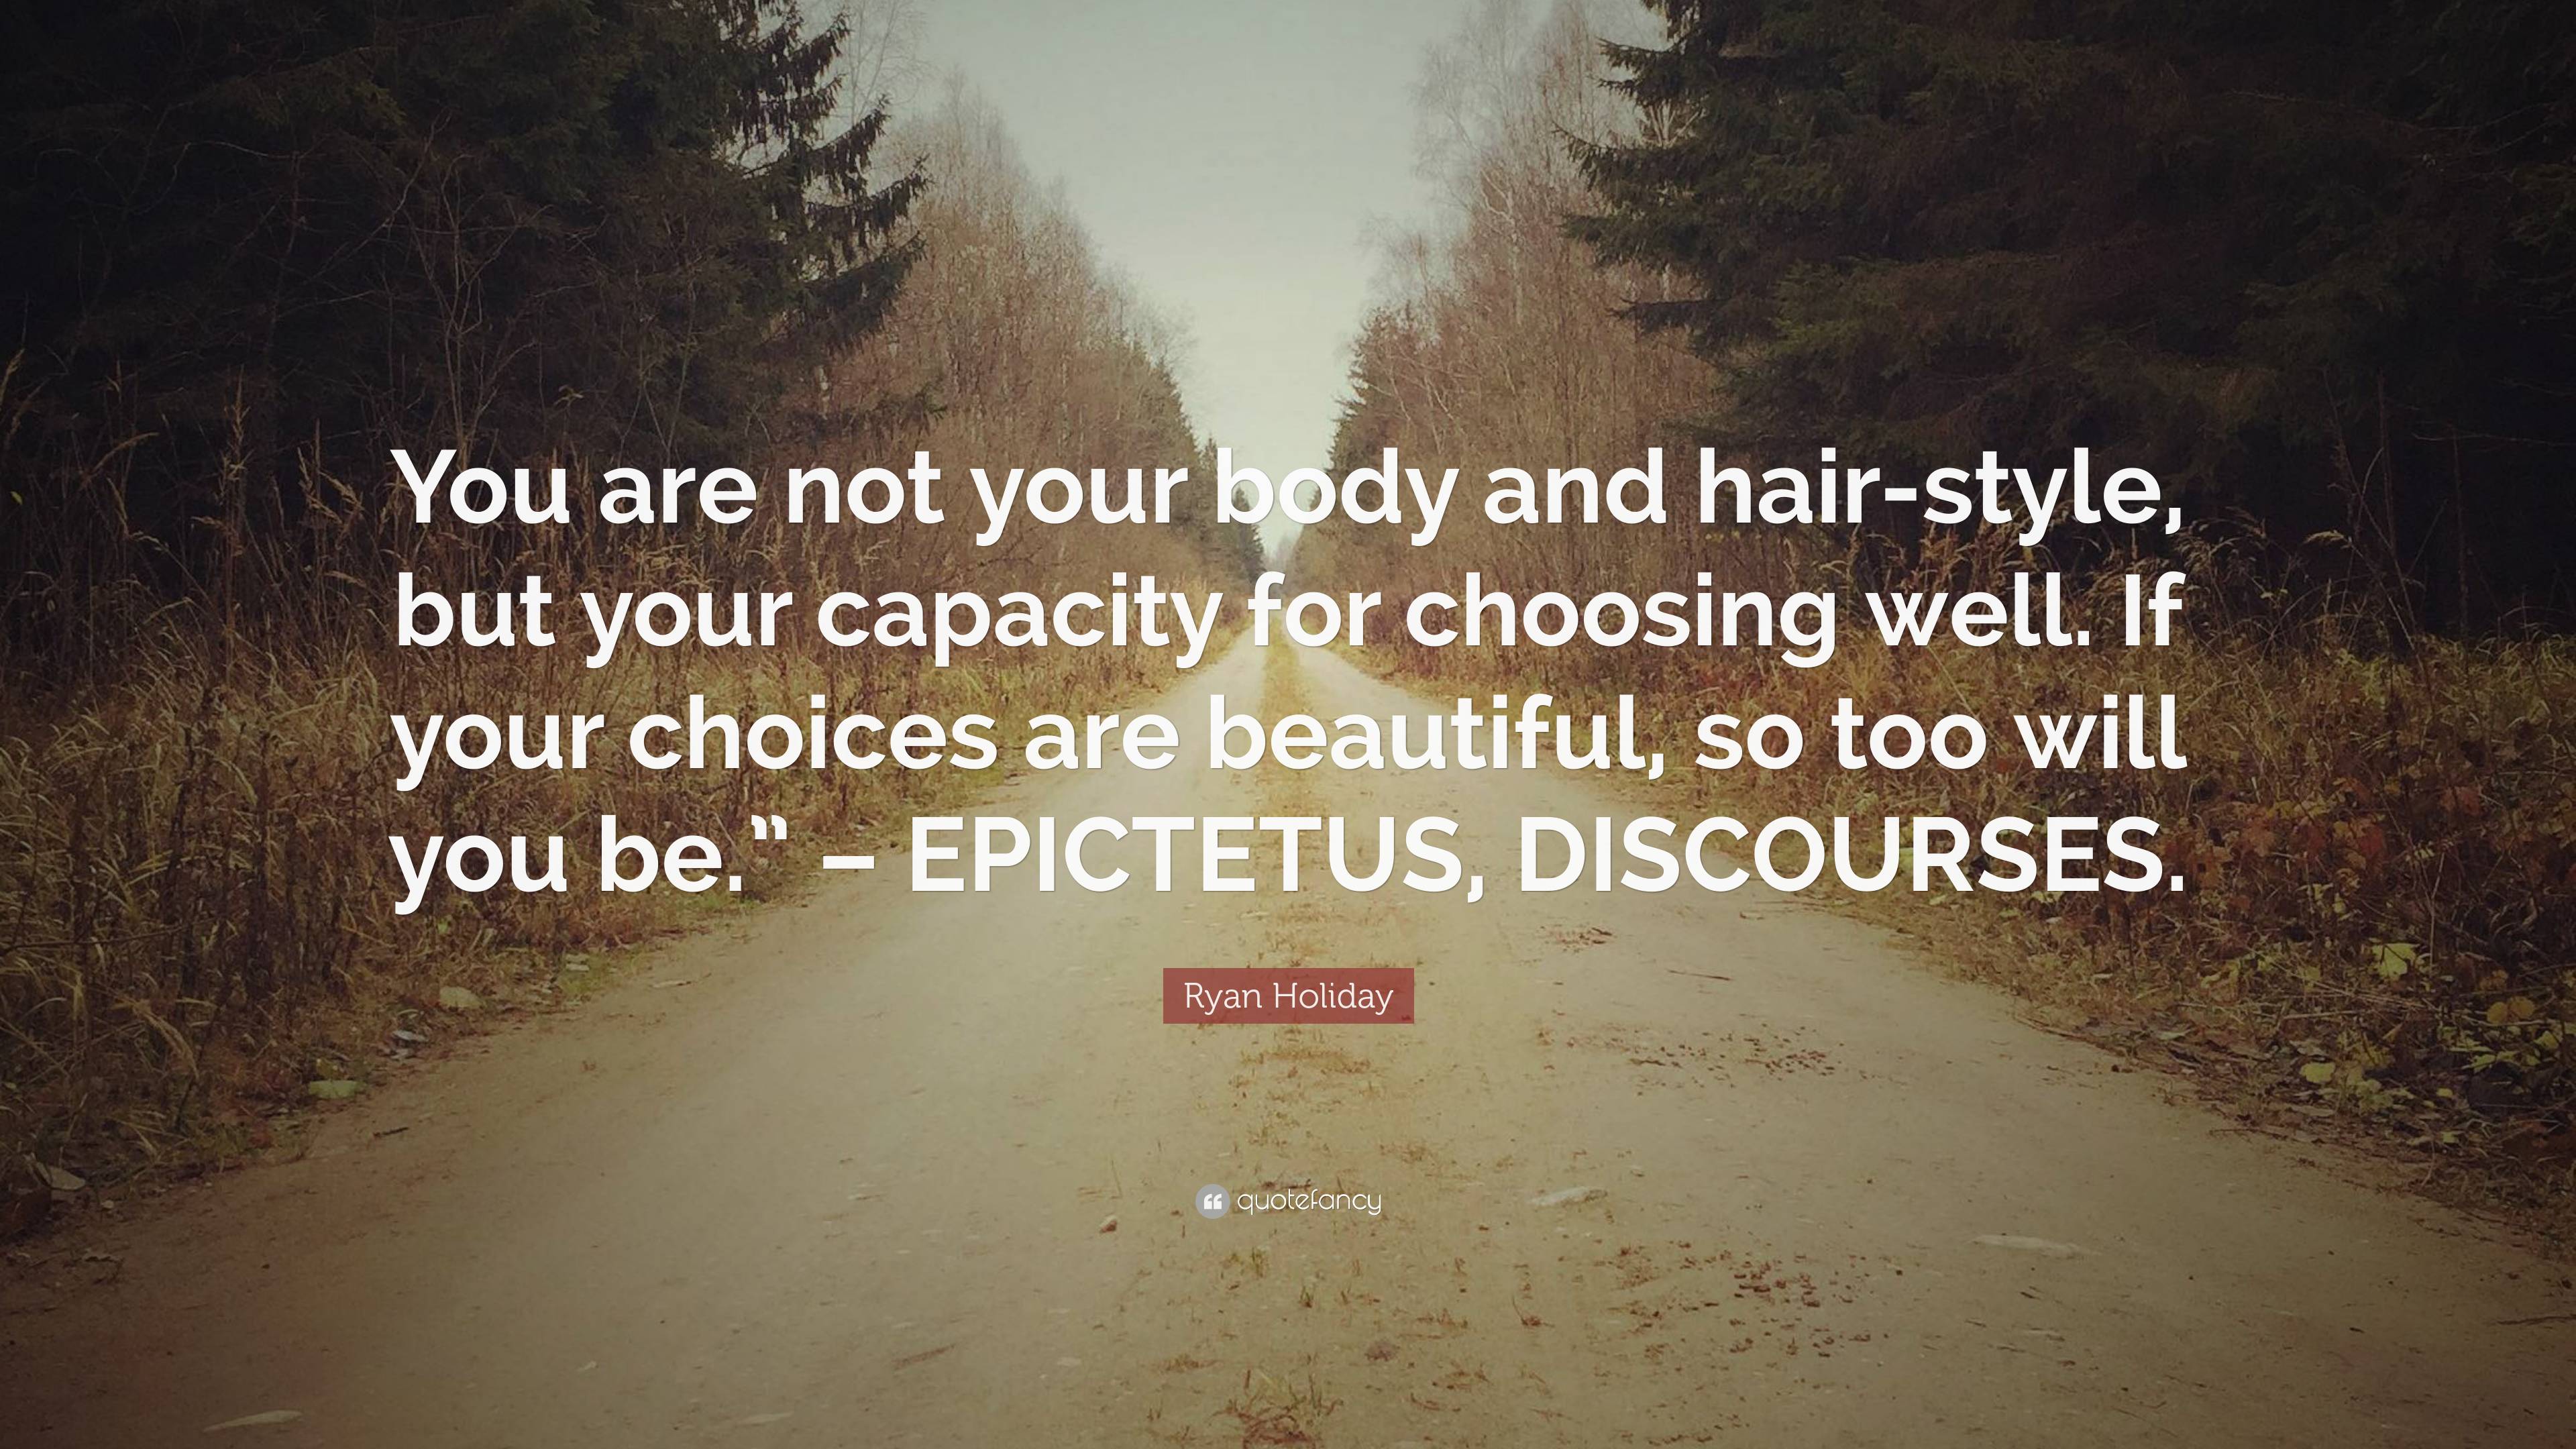 Ryan Holiday Quote: “You are not your body and hair-style, but your  capacity for choosing well. If your choices are beautiful, so too will  yo...”